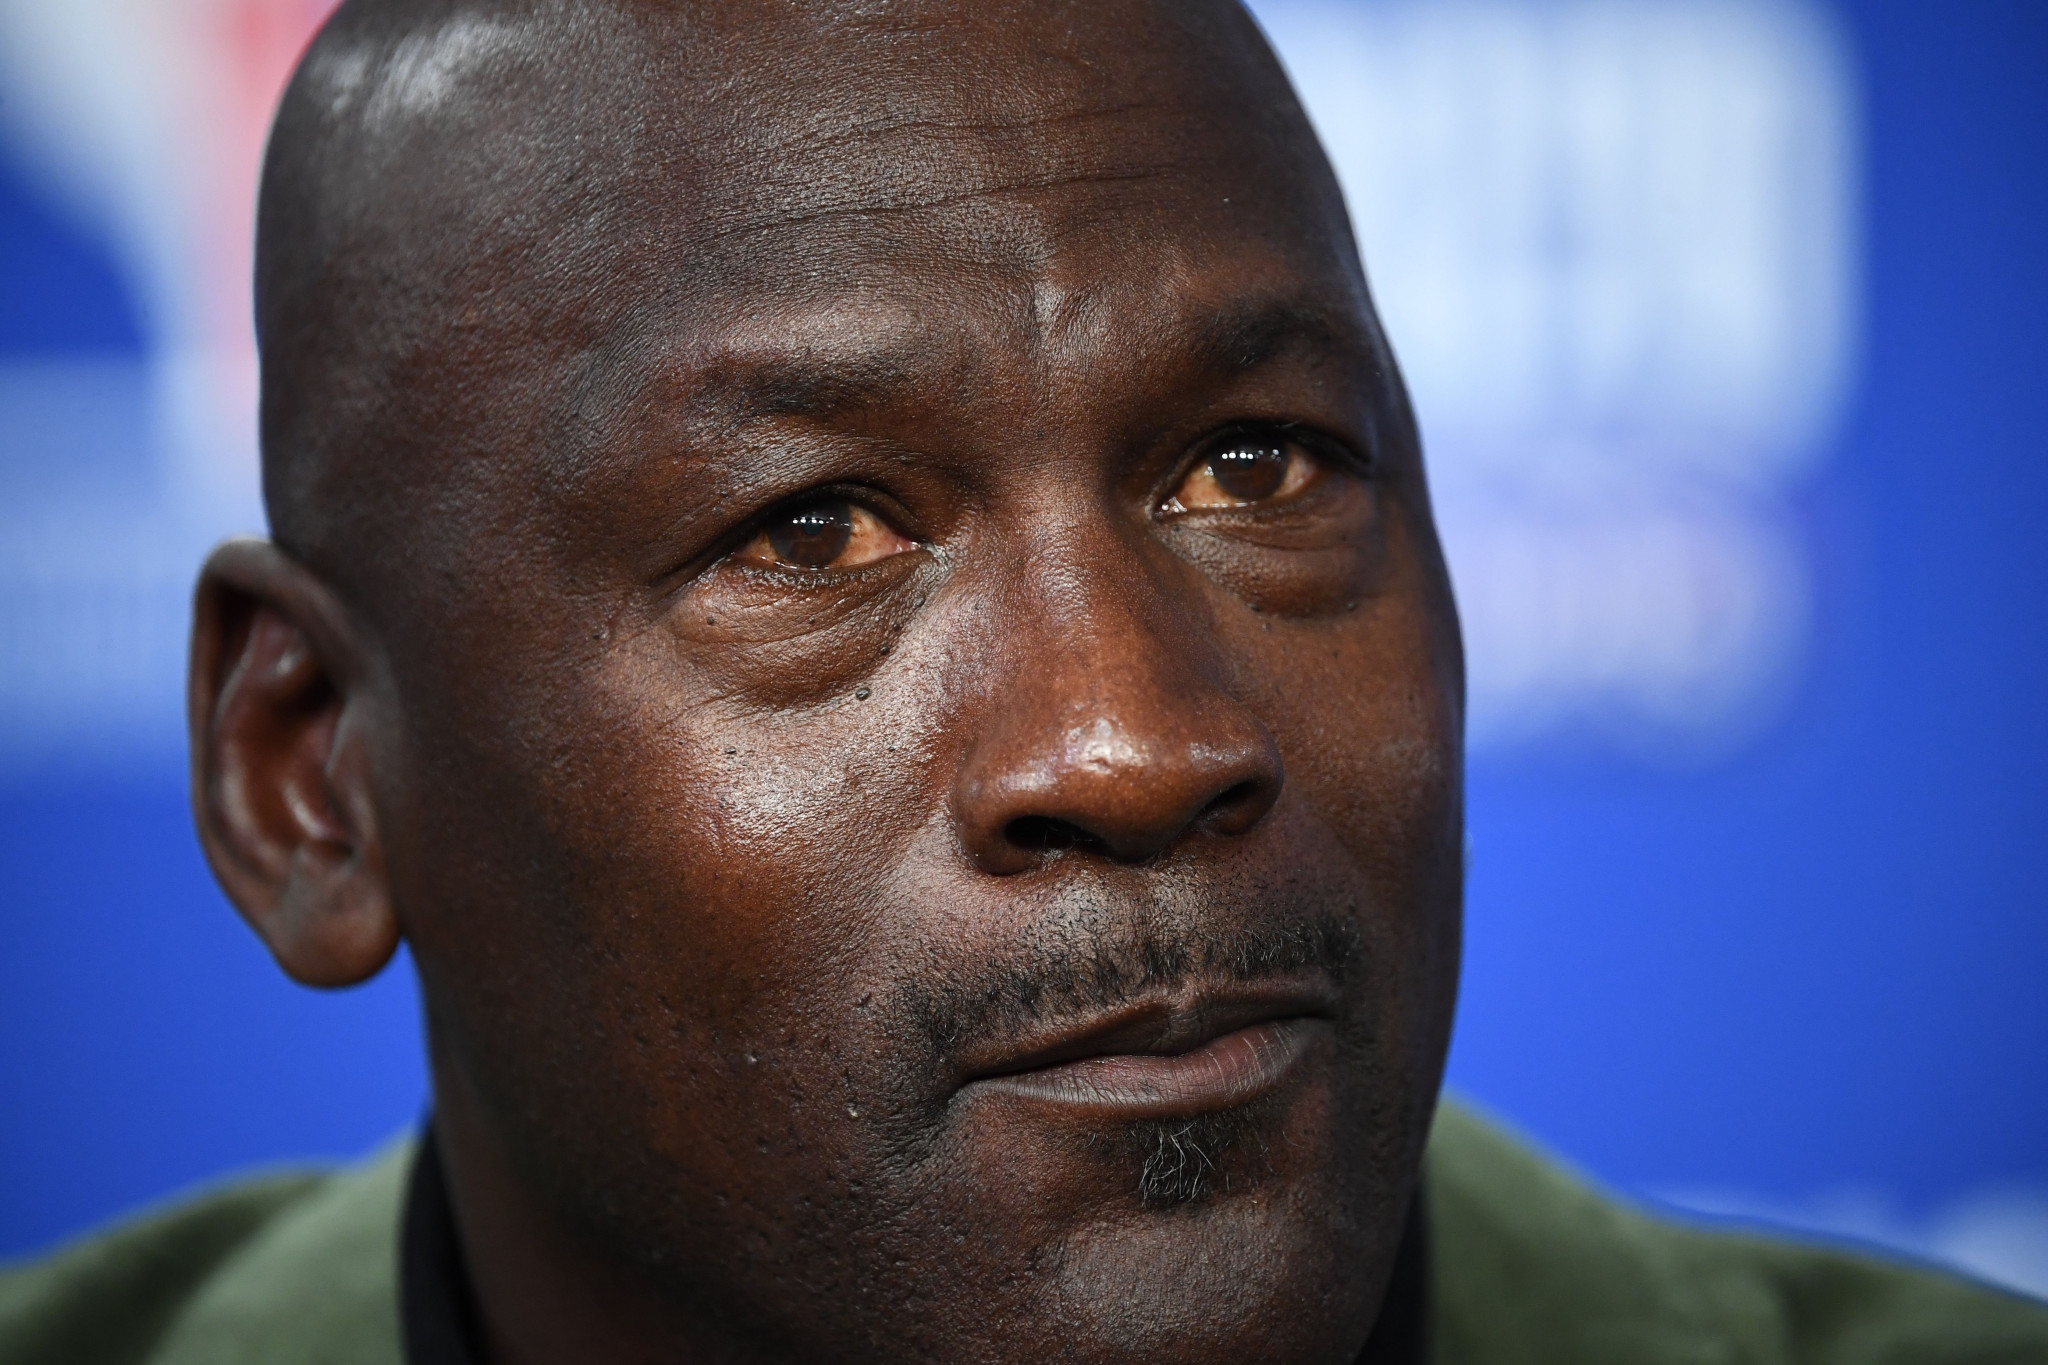 Double Olympic basketball champion Michael Jordan is donating $100 million along with his brand Jordan to tackle "ingrained racism" ©Getty Images